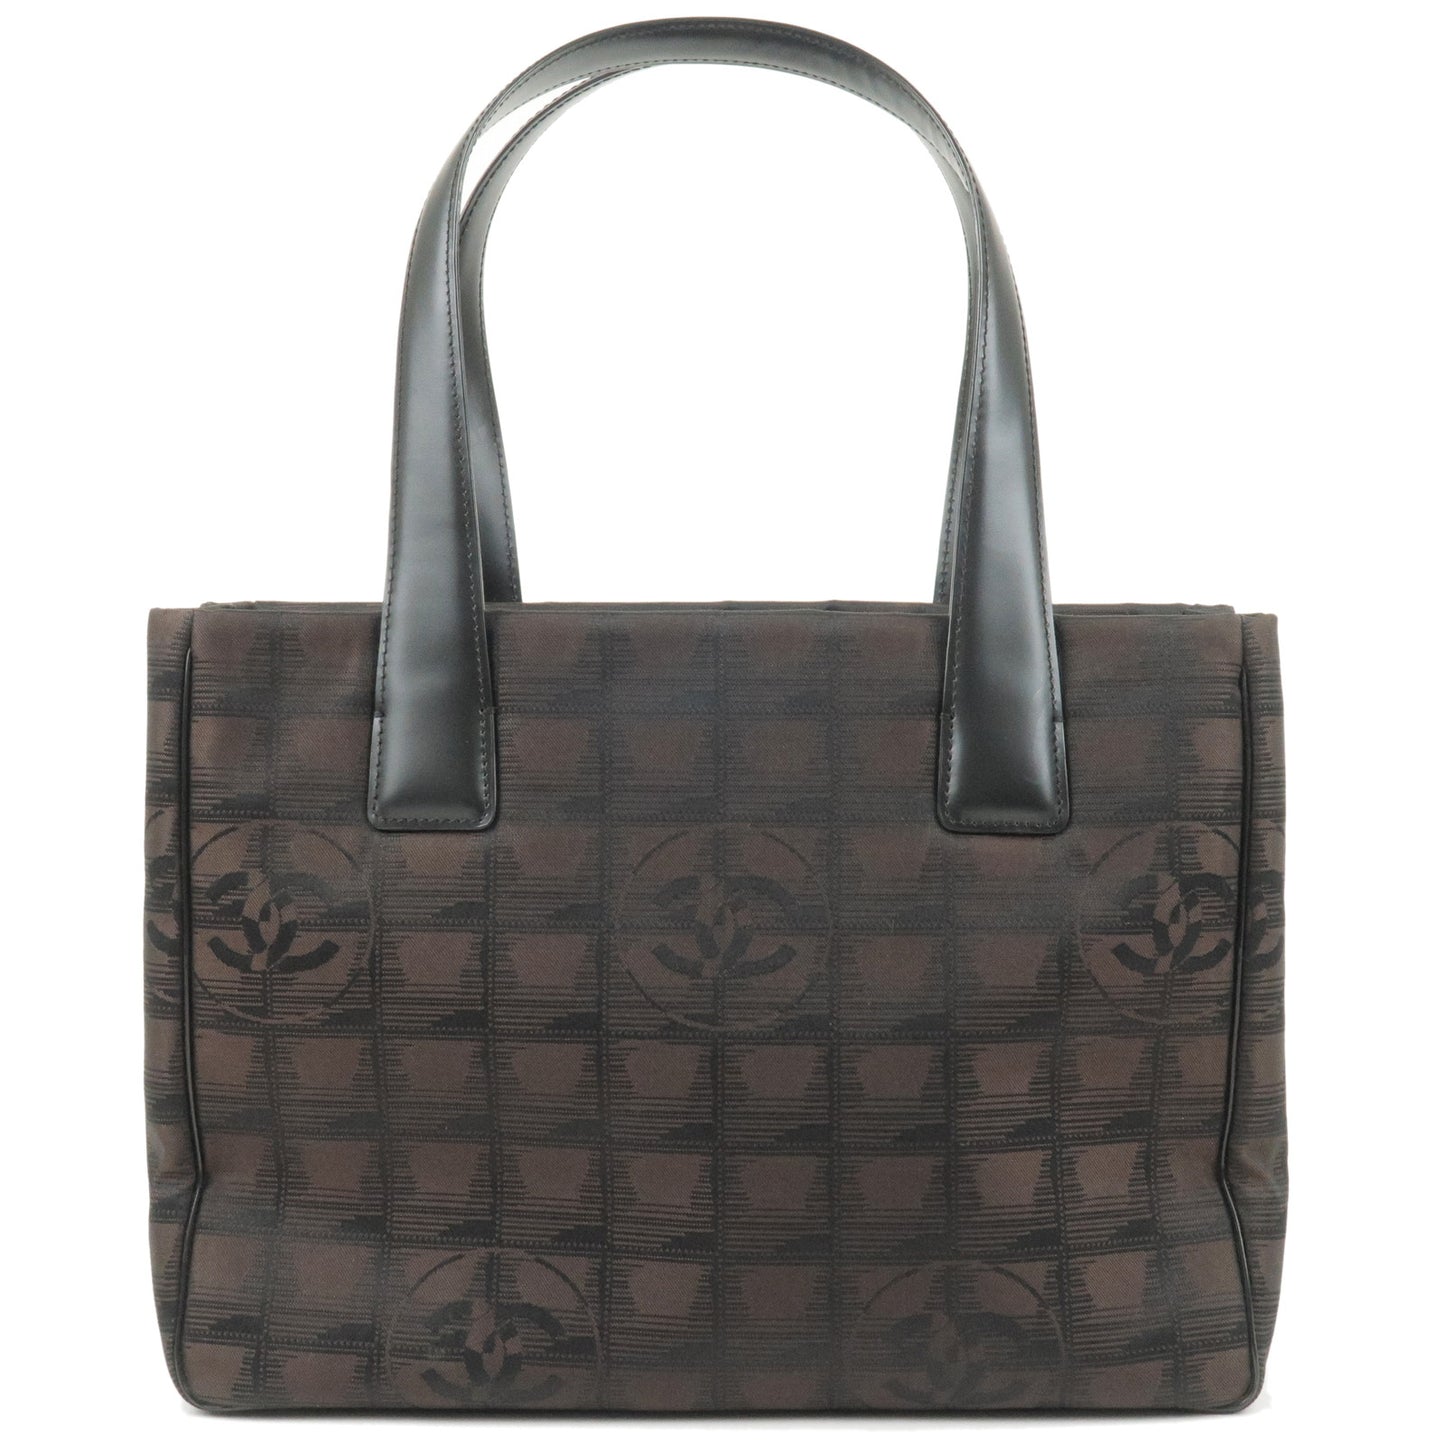 CHANEL-Travel-Line-Tote-PM-Nylon-Jacquard-Leather-Brown-A15991